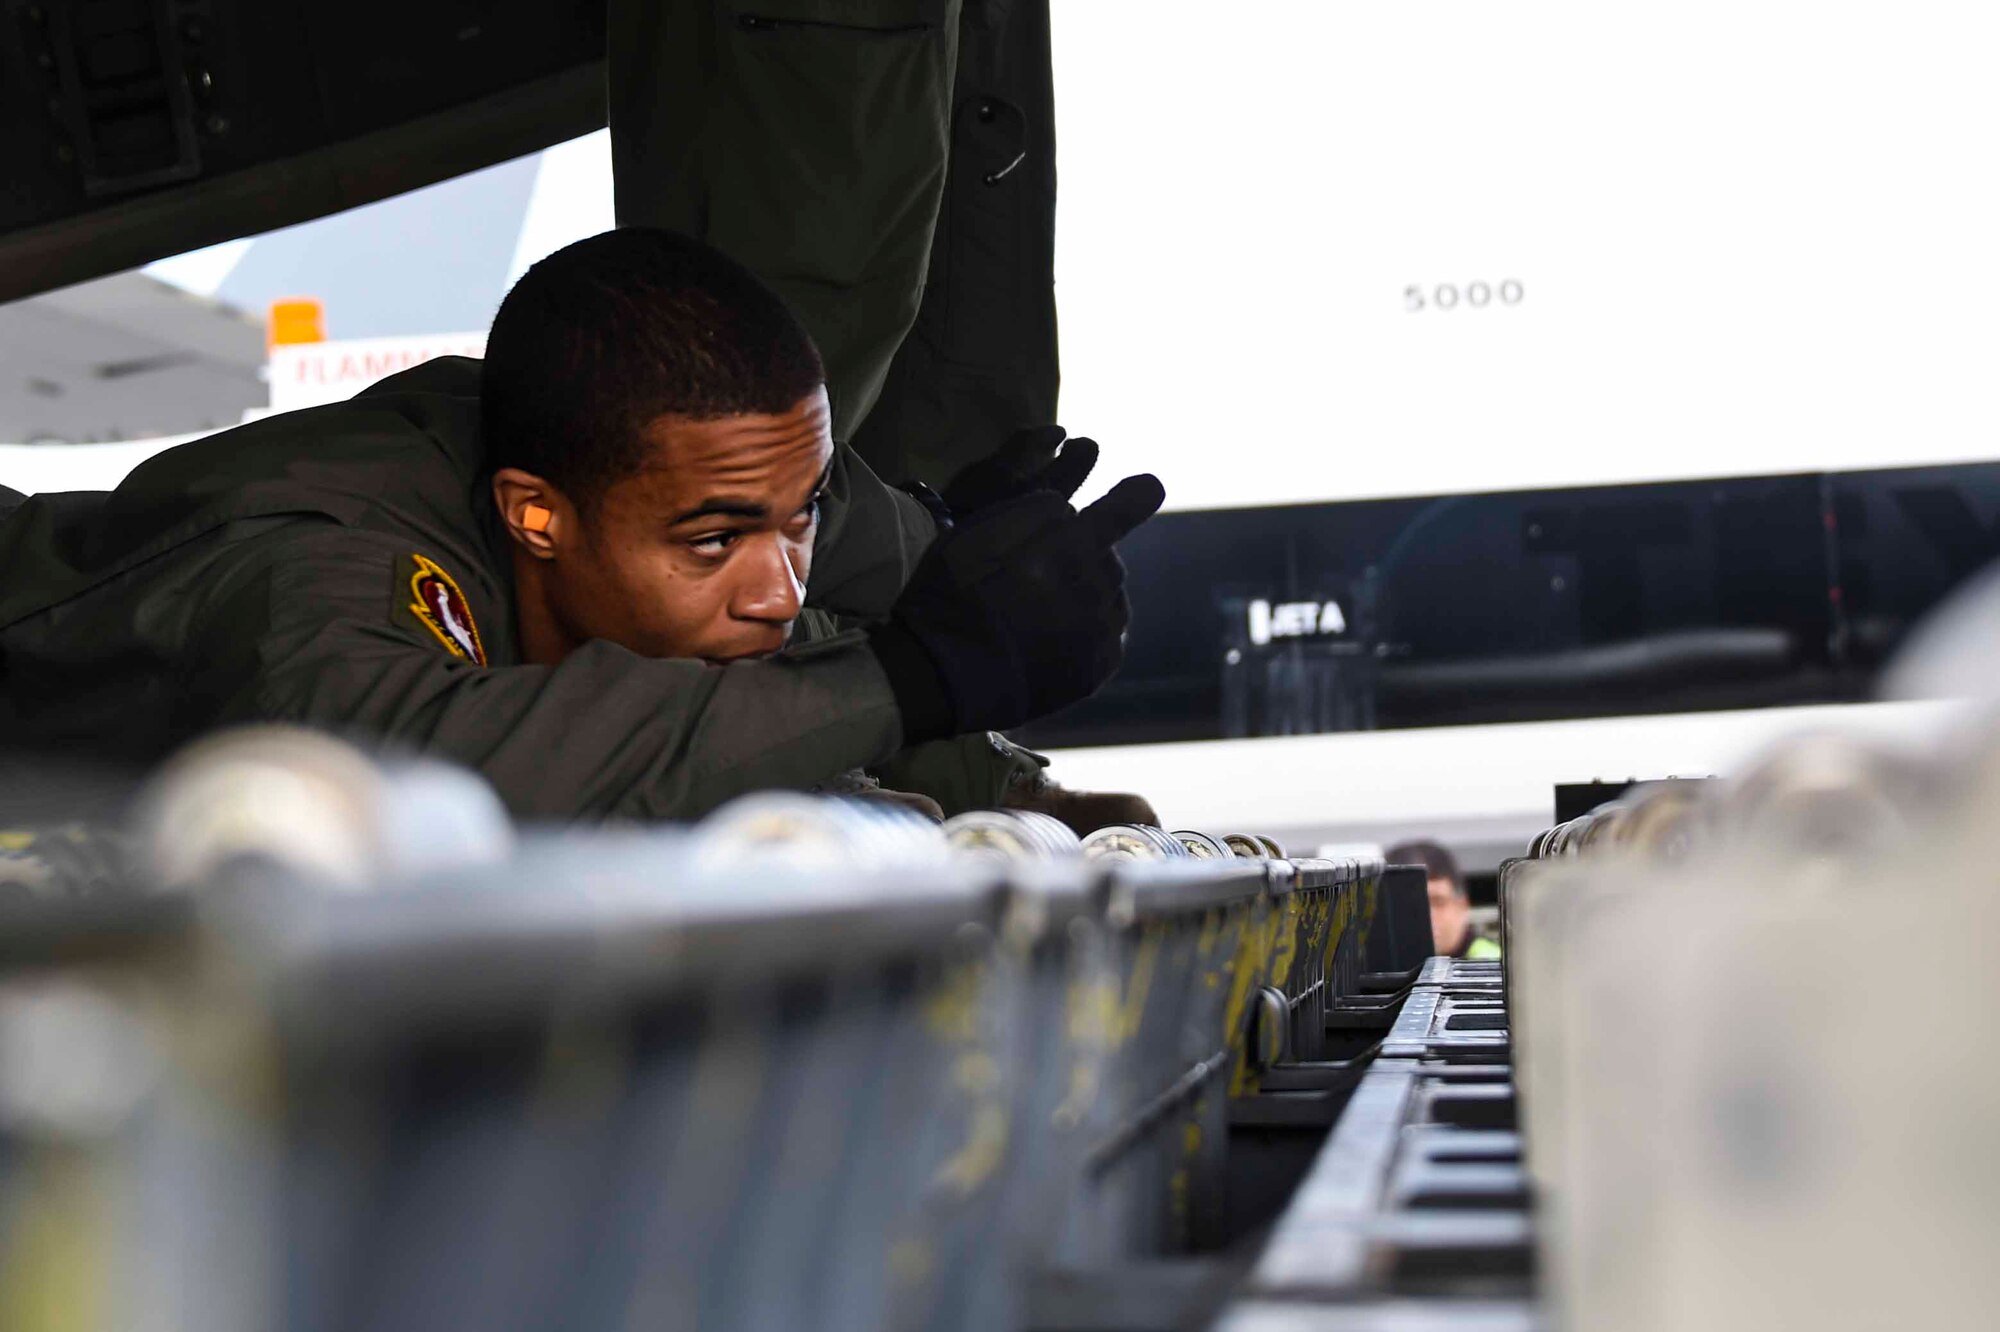 U.S. Air Force Airman 1st Class Seneca Williams, a New York Air National Guard 105th Airlift Wing load master, helps position a pallet to load onto a C-17 Globemaster III at the Fresno Air National Guard Base, Jan. 21, 2016, in support of the 144th Fighter Wing’s participation in Red Flag 16-01. Red Flag is a realistic combat training exercise, which is hosted by Nellis Air Force Base, Nevada and the U.S. Air Force Warfare Center. The 105th AW airlifted 12 pallets and 29 personnel assigned to the 144th FW. (U.S. Air National Guard Senior Airman Klynne Pearl Serrano)